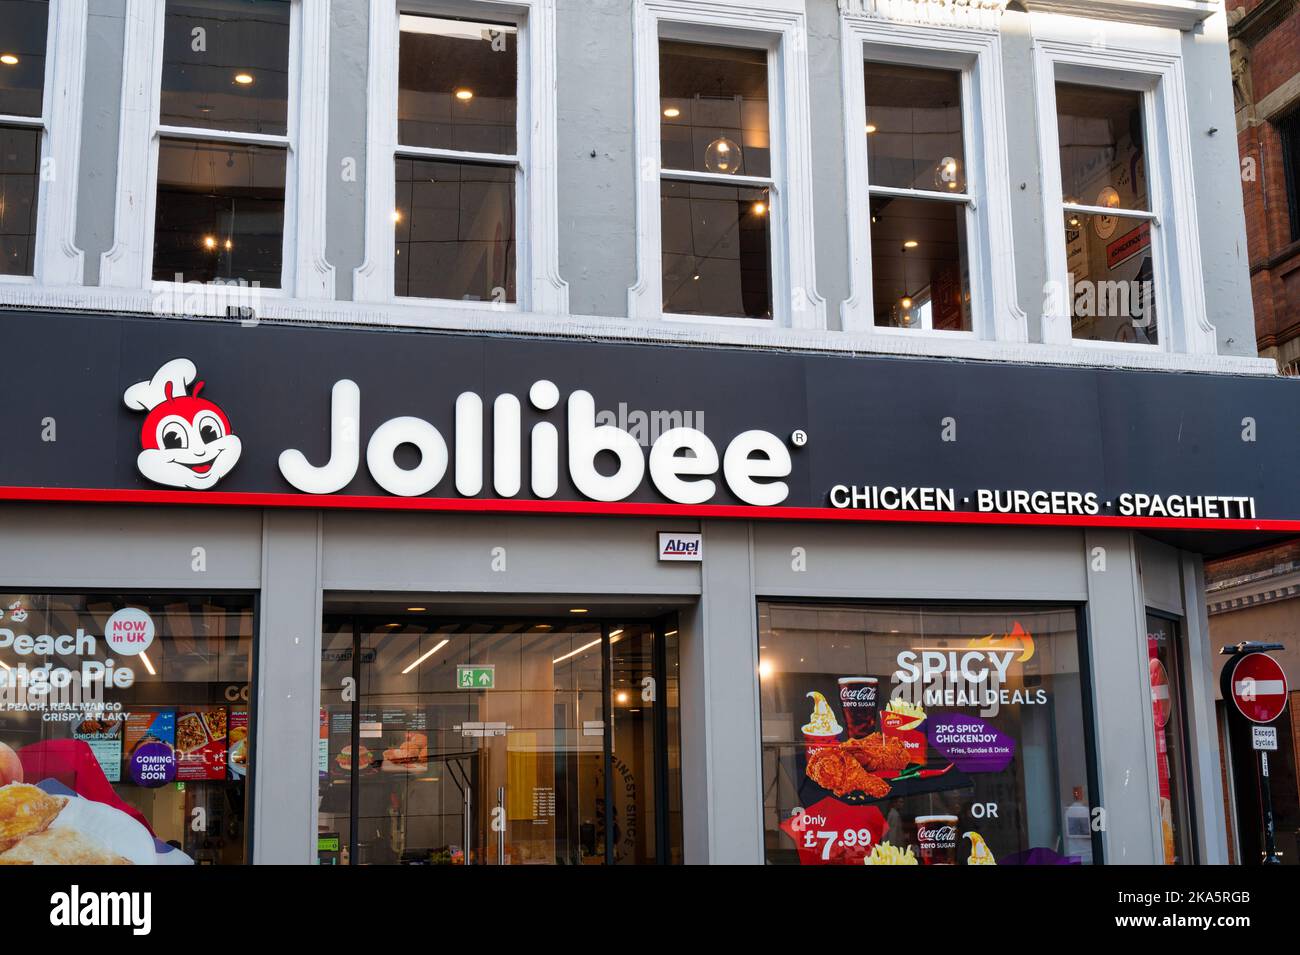 Liverpool, UK- Sept 7, 2022: The sign for Jollibee fast food restaurant in Liverpool England Stock Photo